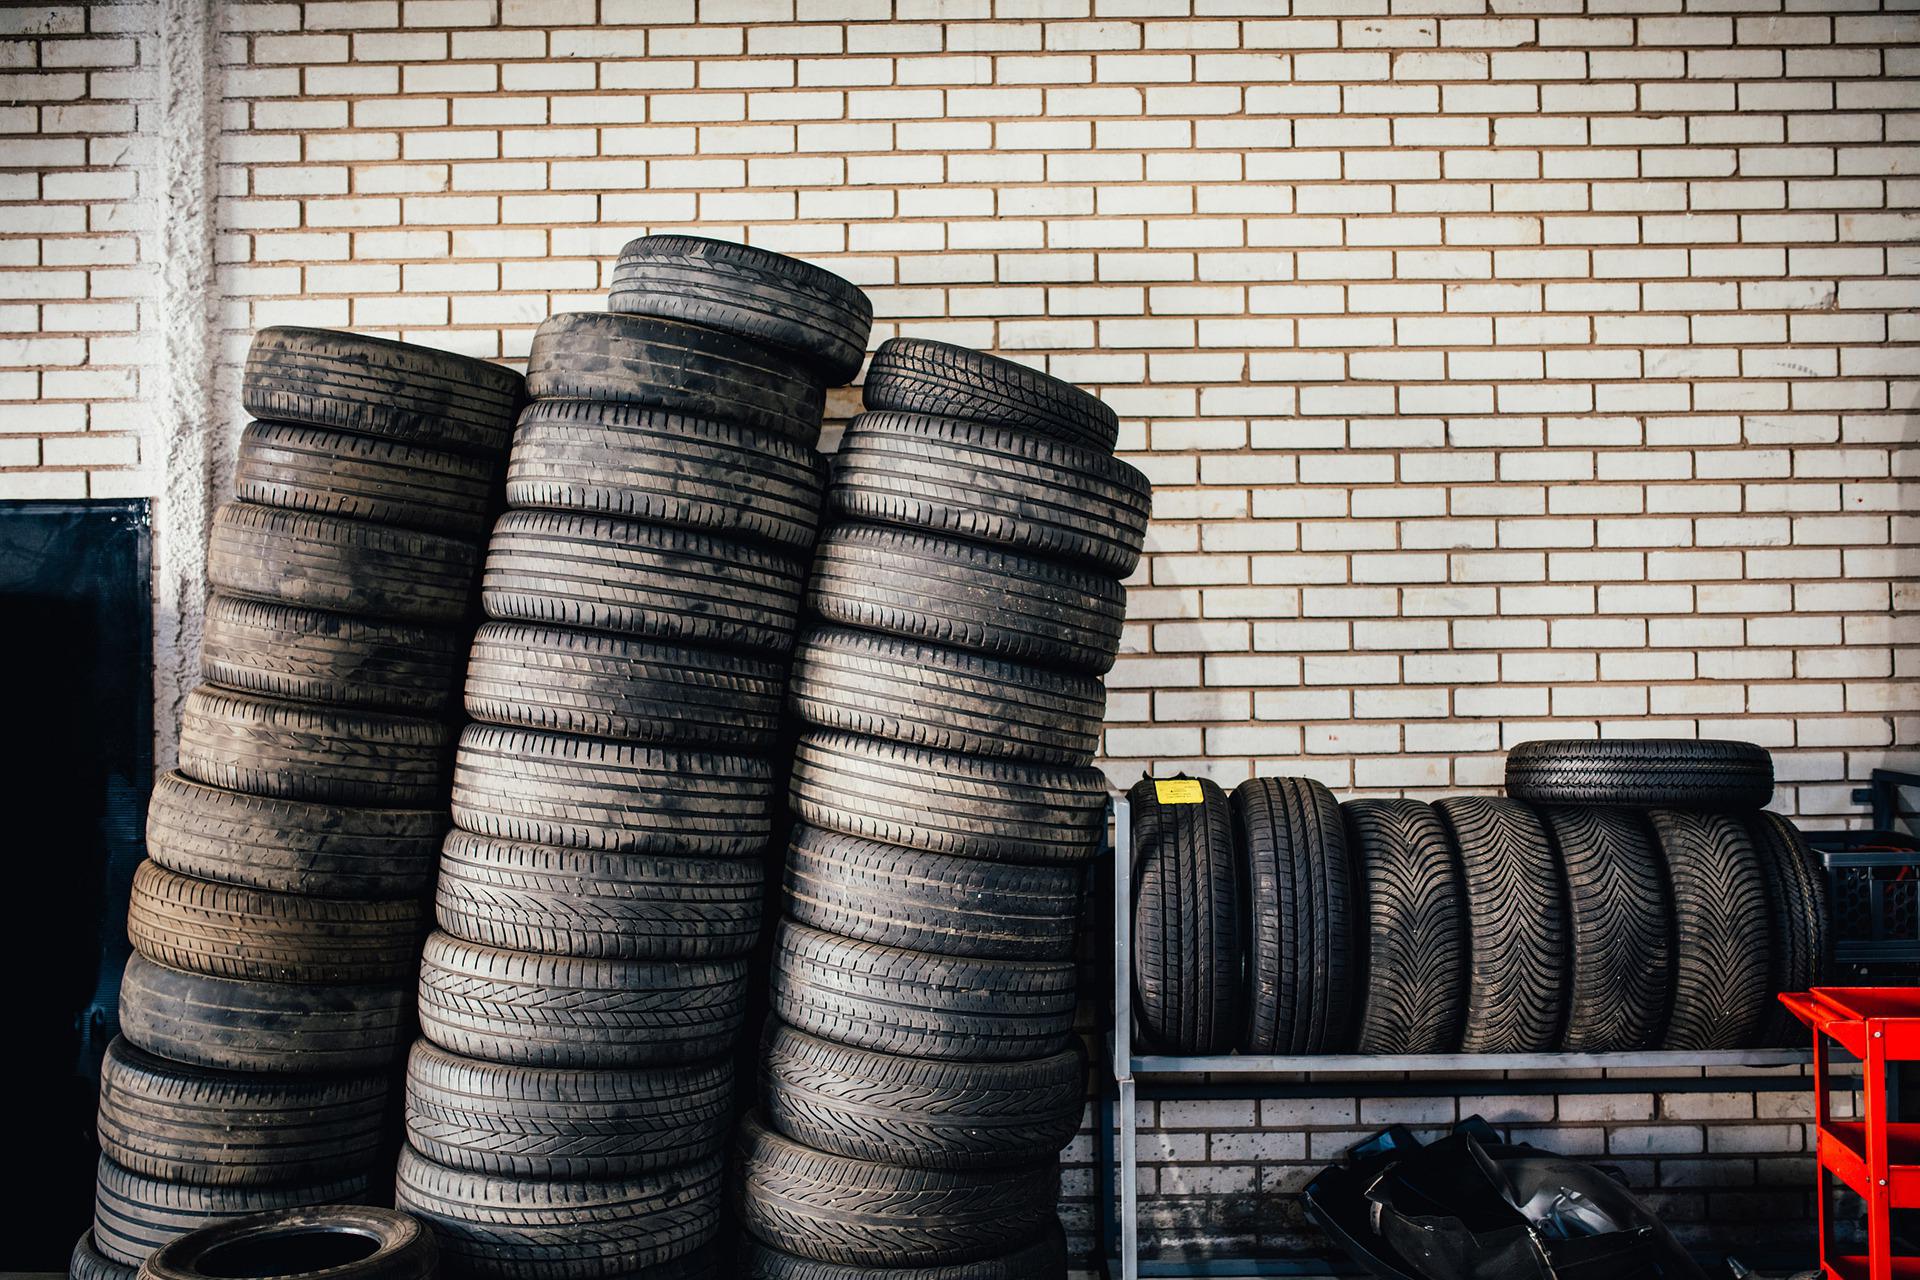 Tires lined up in a garage leaning against a brick wall.